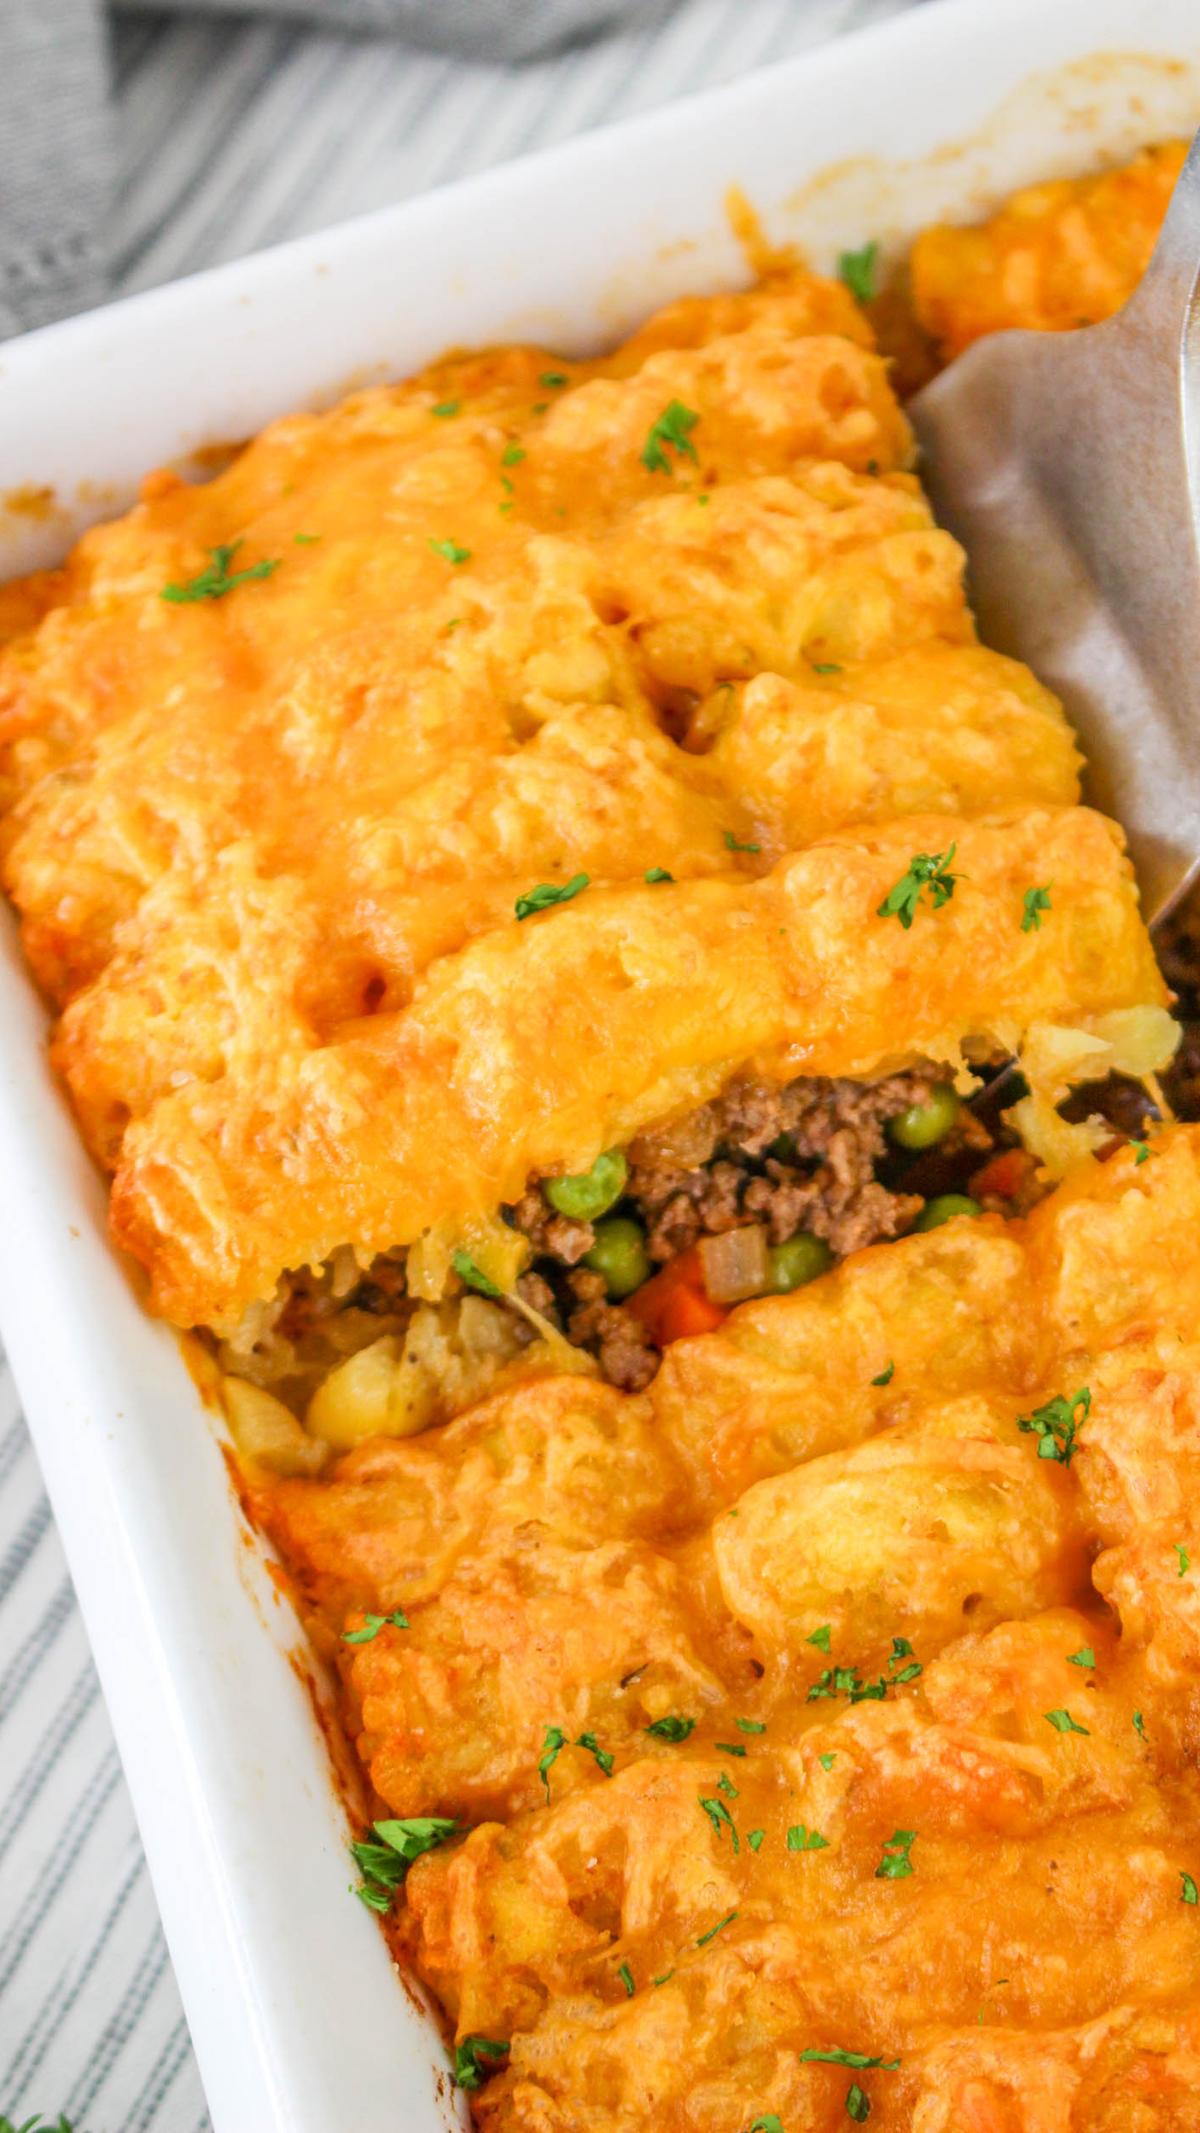 Slide of shepherds pie with tater tots being lifted out of the casserole dish.